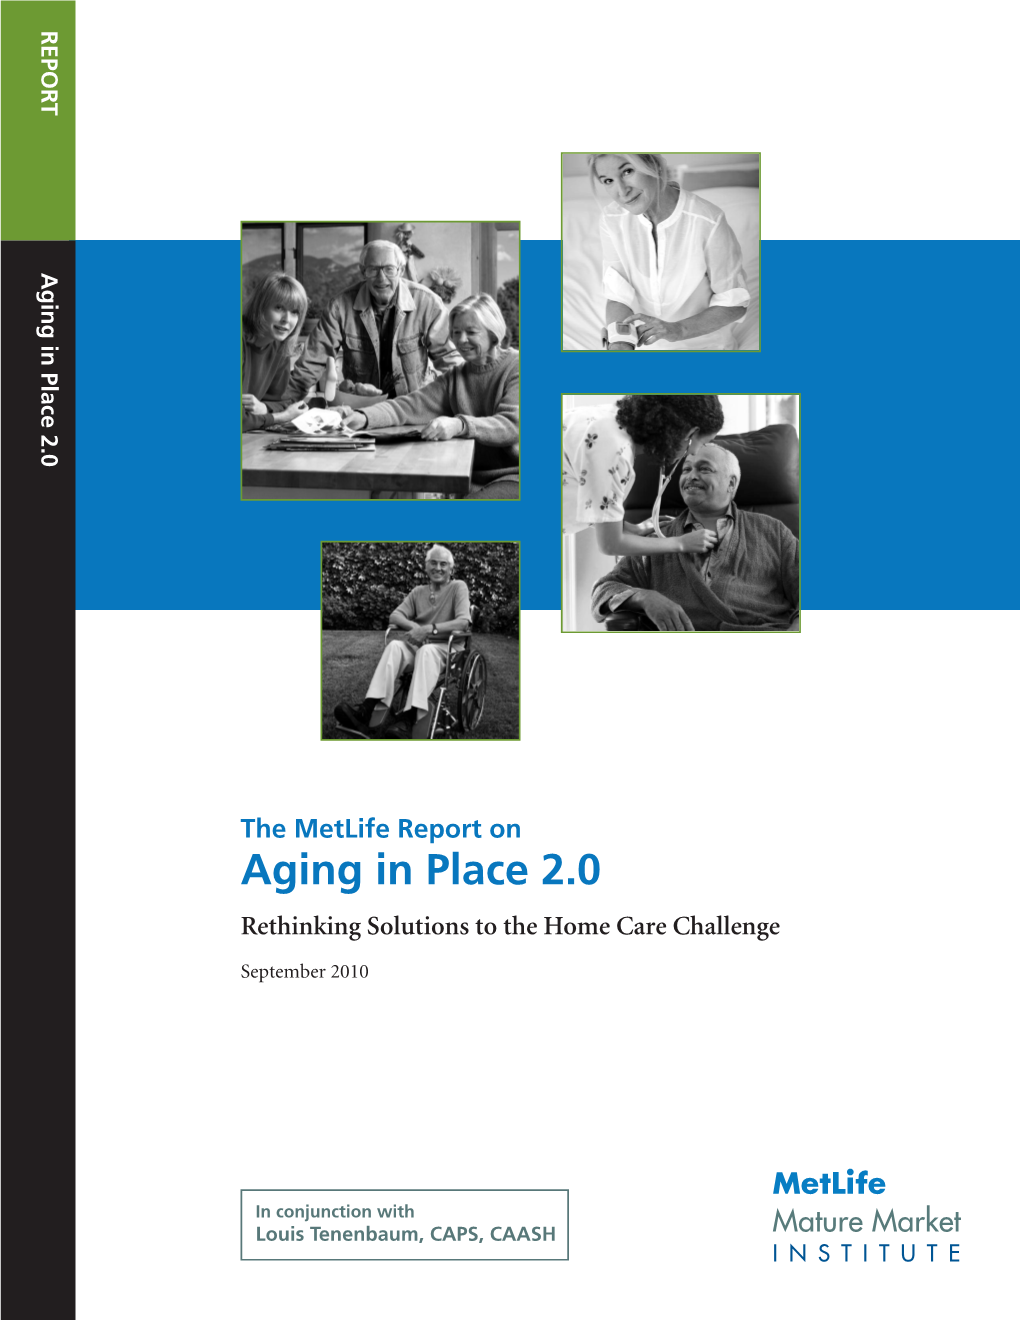 Aging in Place 2.0 Rethinking Solutions to the Home Care Challenge